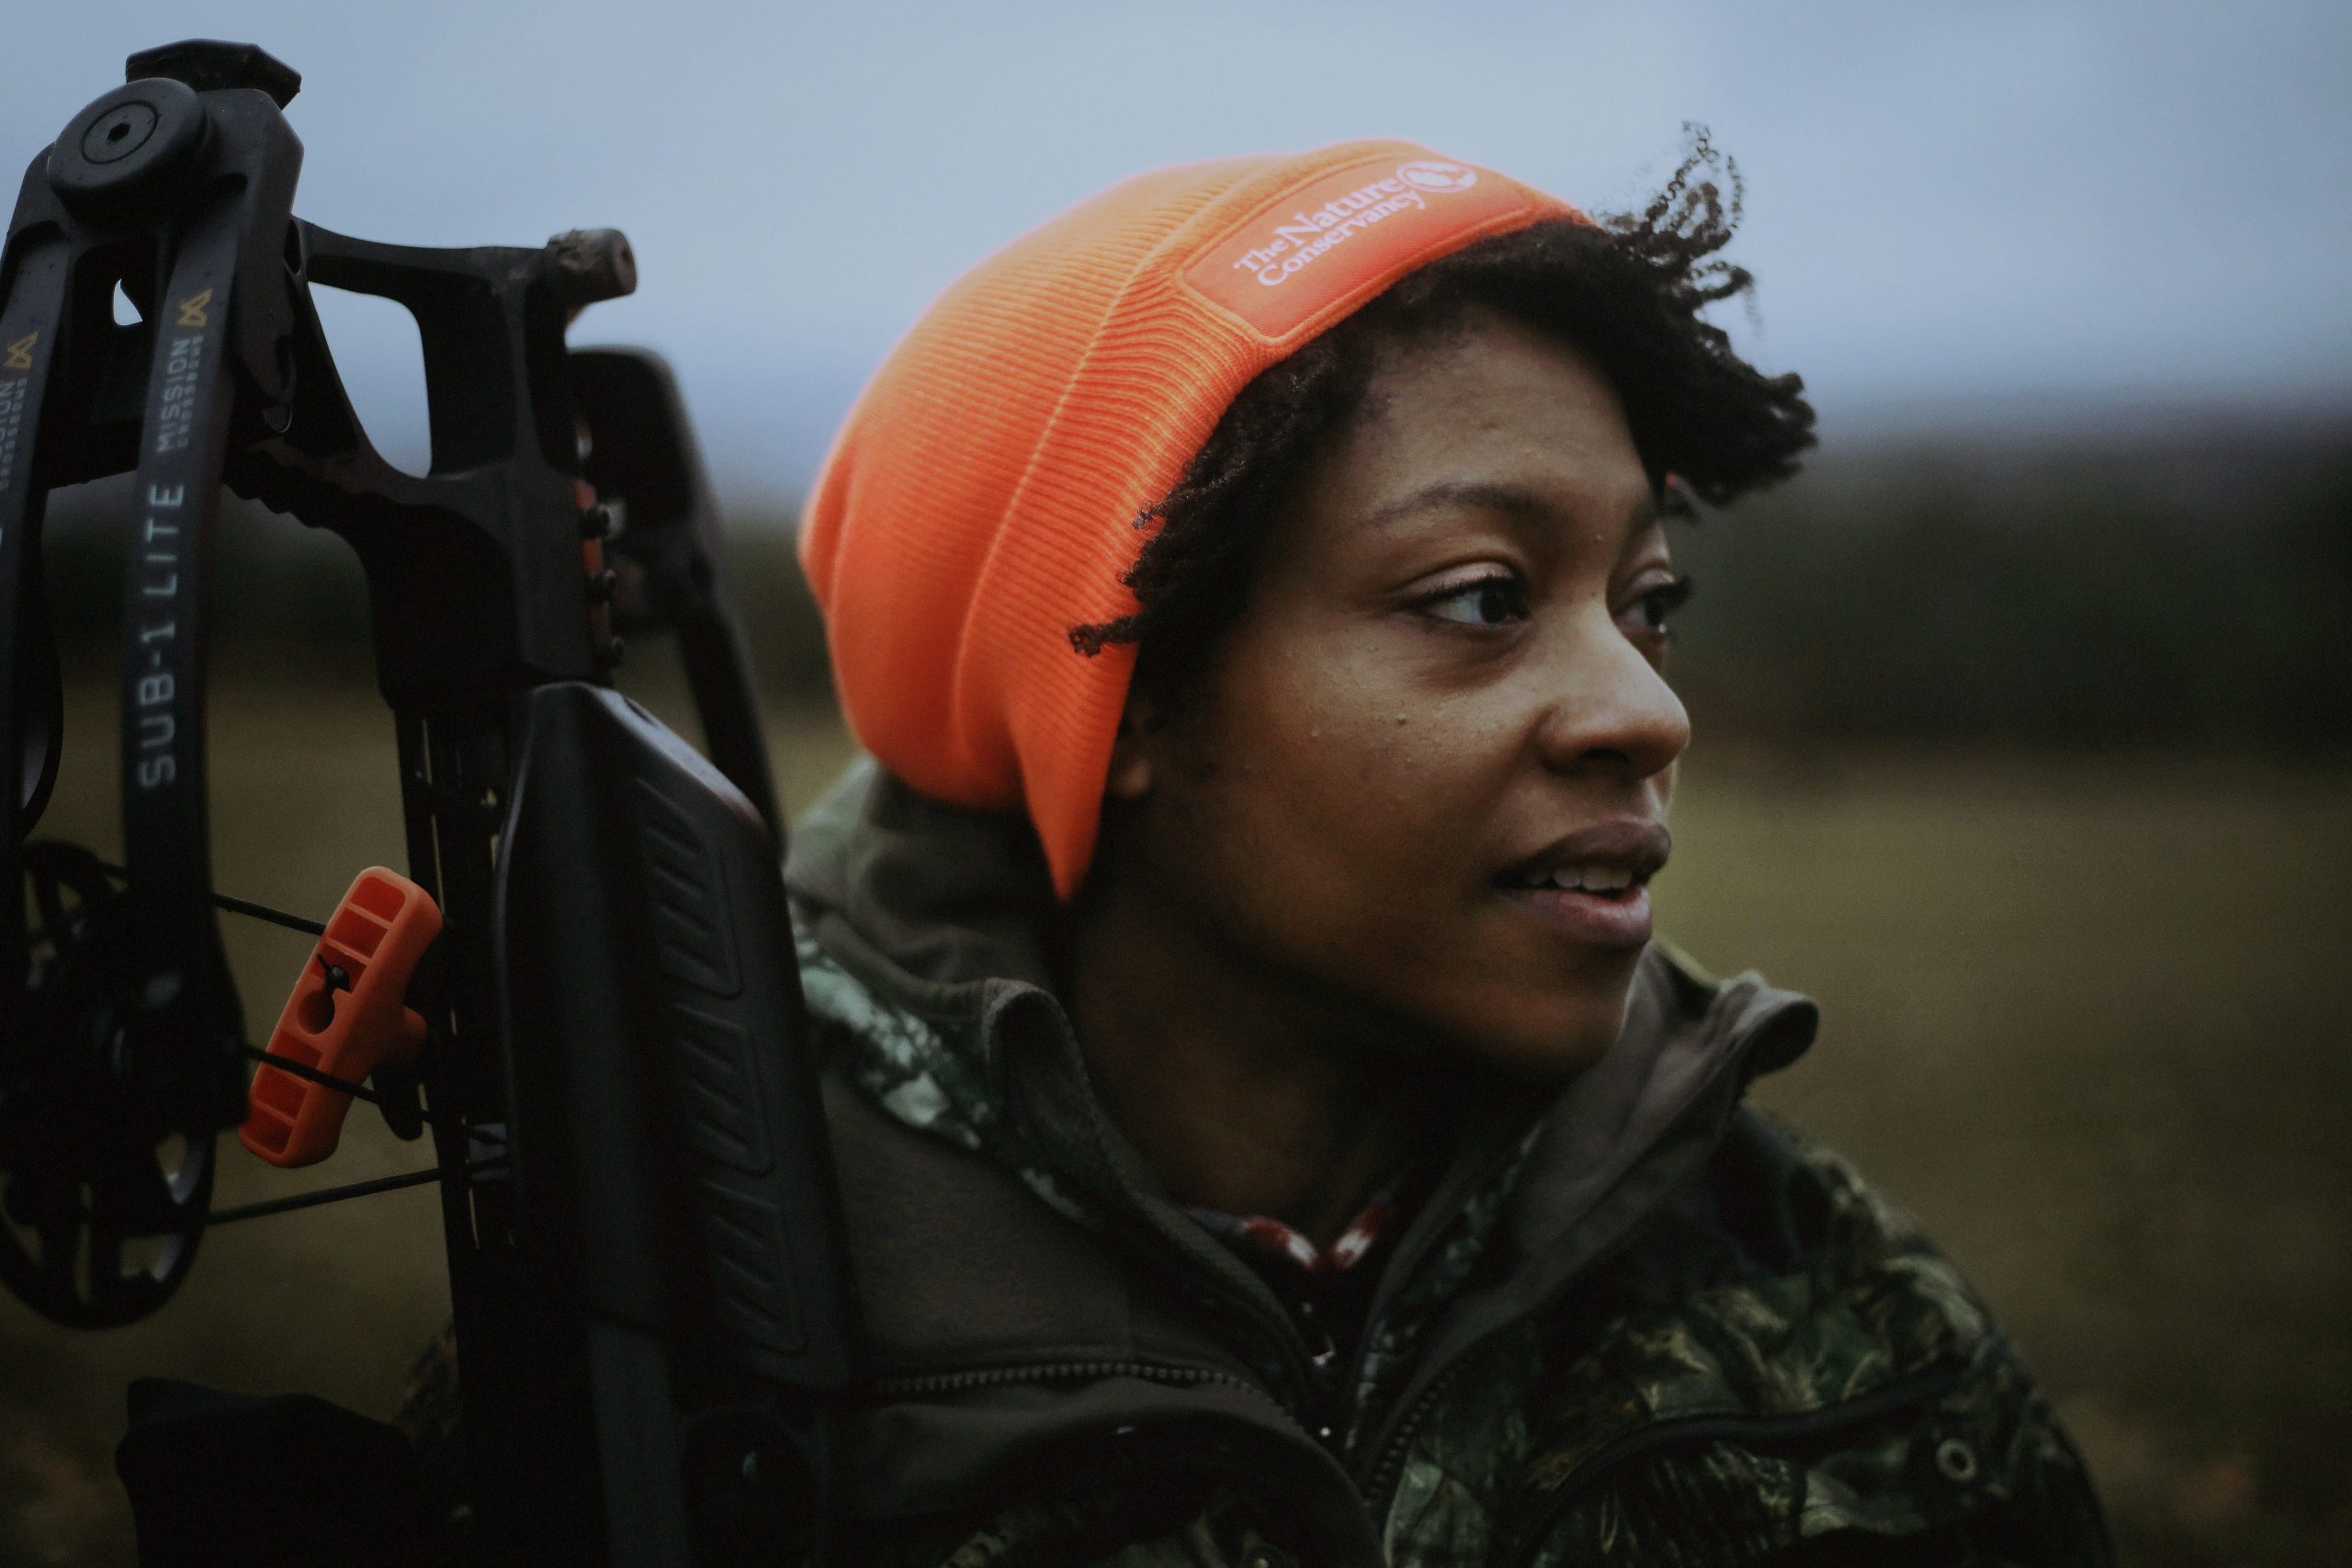 Hunters of Color collabs to produce Deer Hunt for New BIPOC Hunters